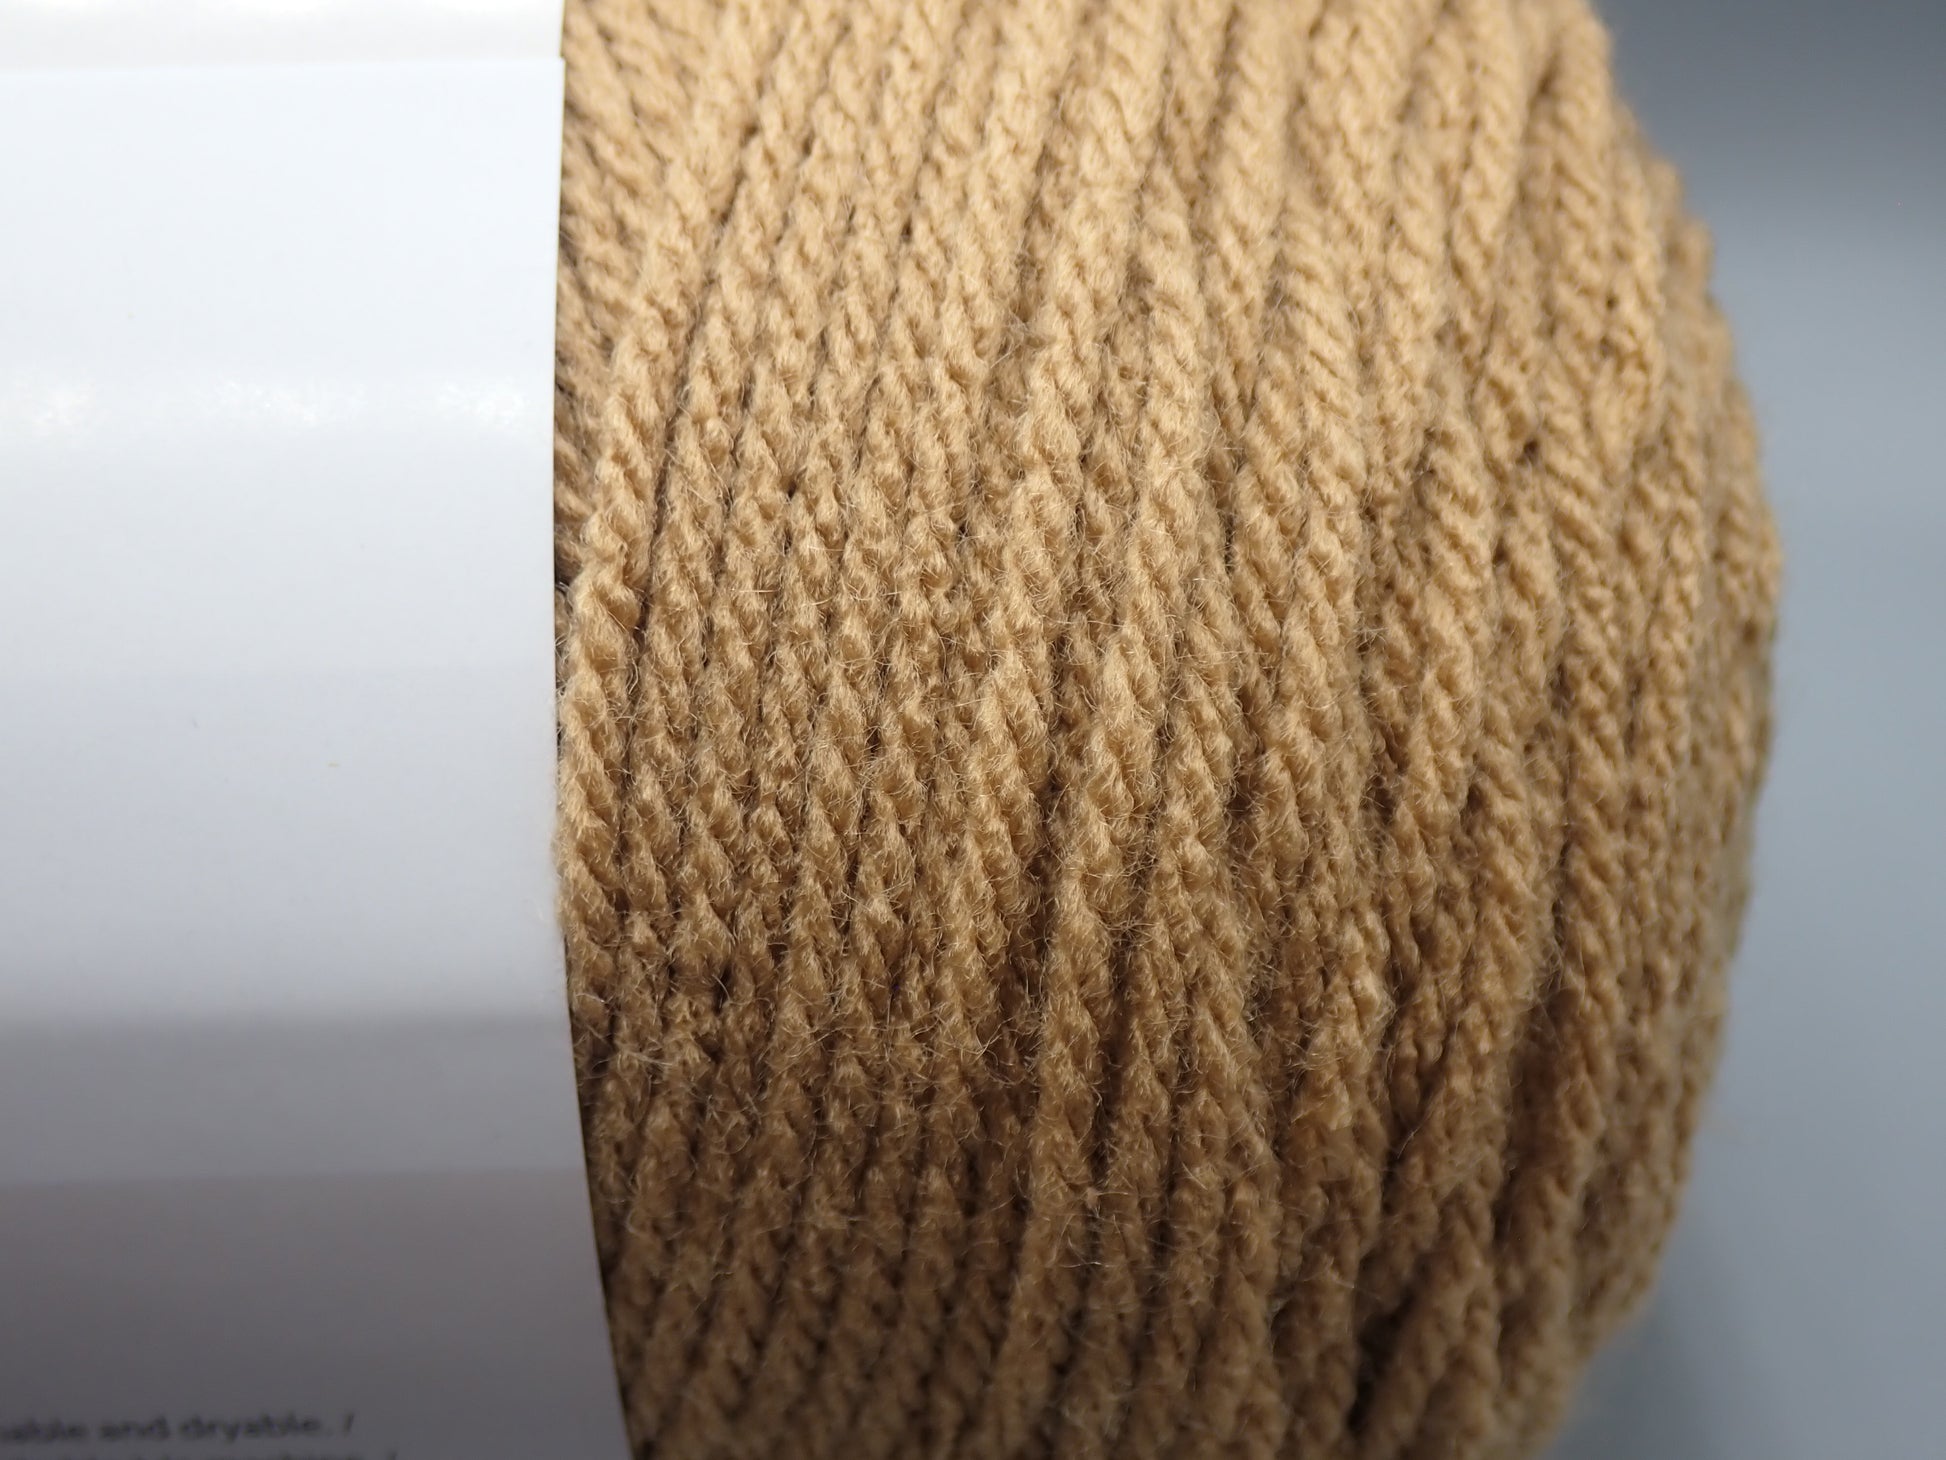 Bernat Worsted weight Super Value Yarn Topaz – Sweetwater Yarns